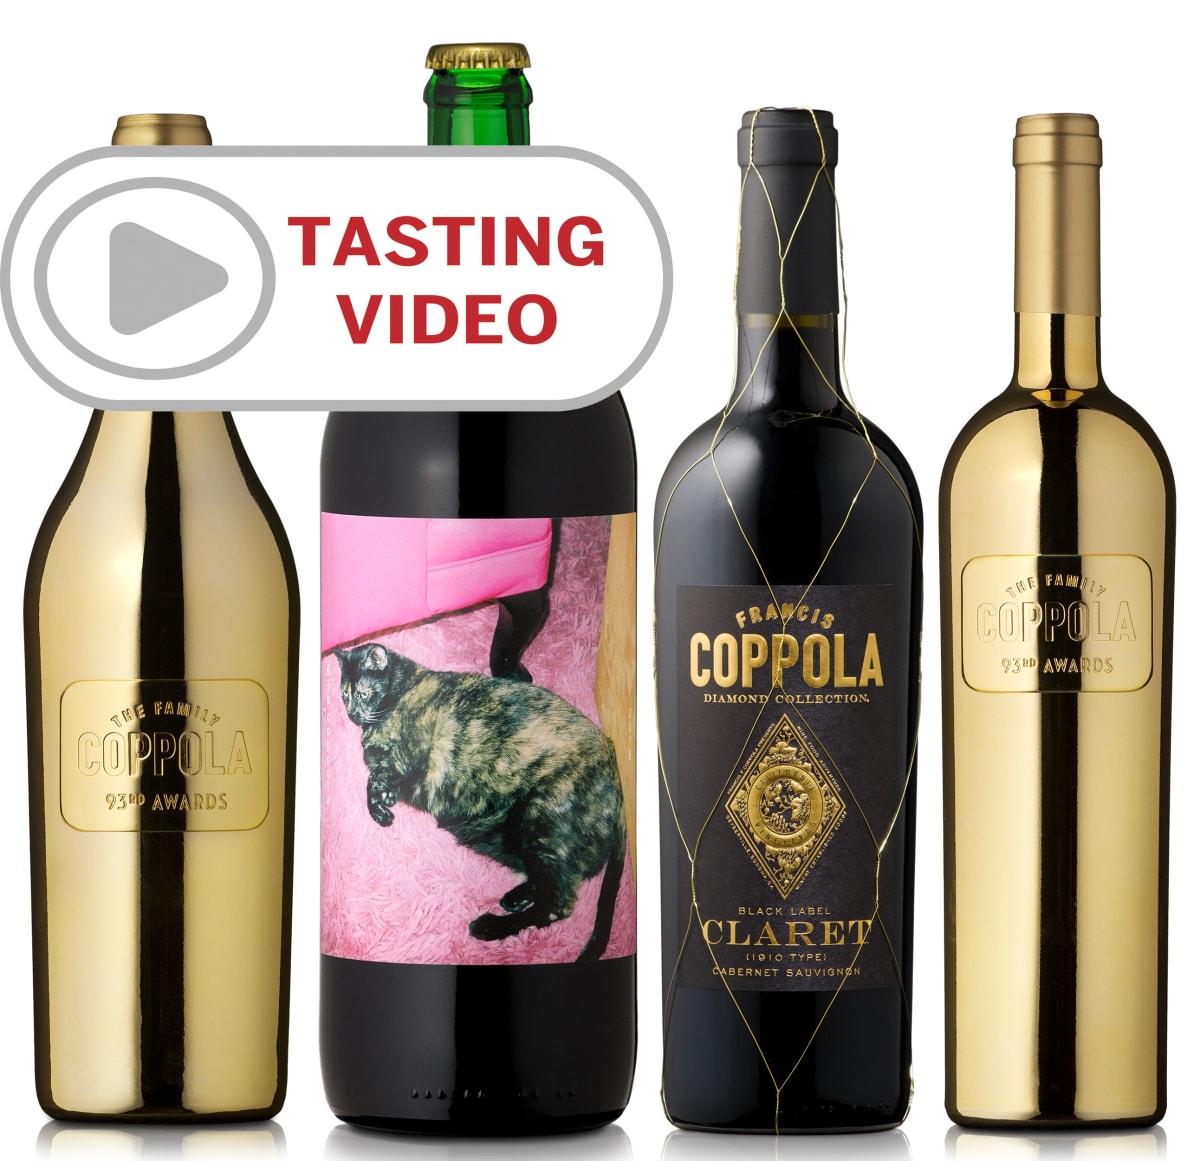 wine.com Coppola Awards Season Collection with Tasting Video  Gift Product Image